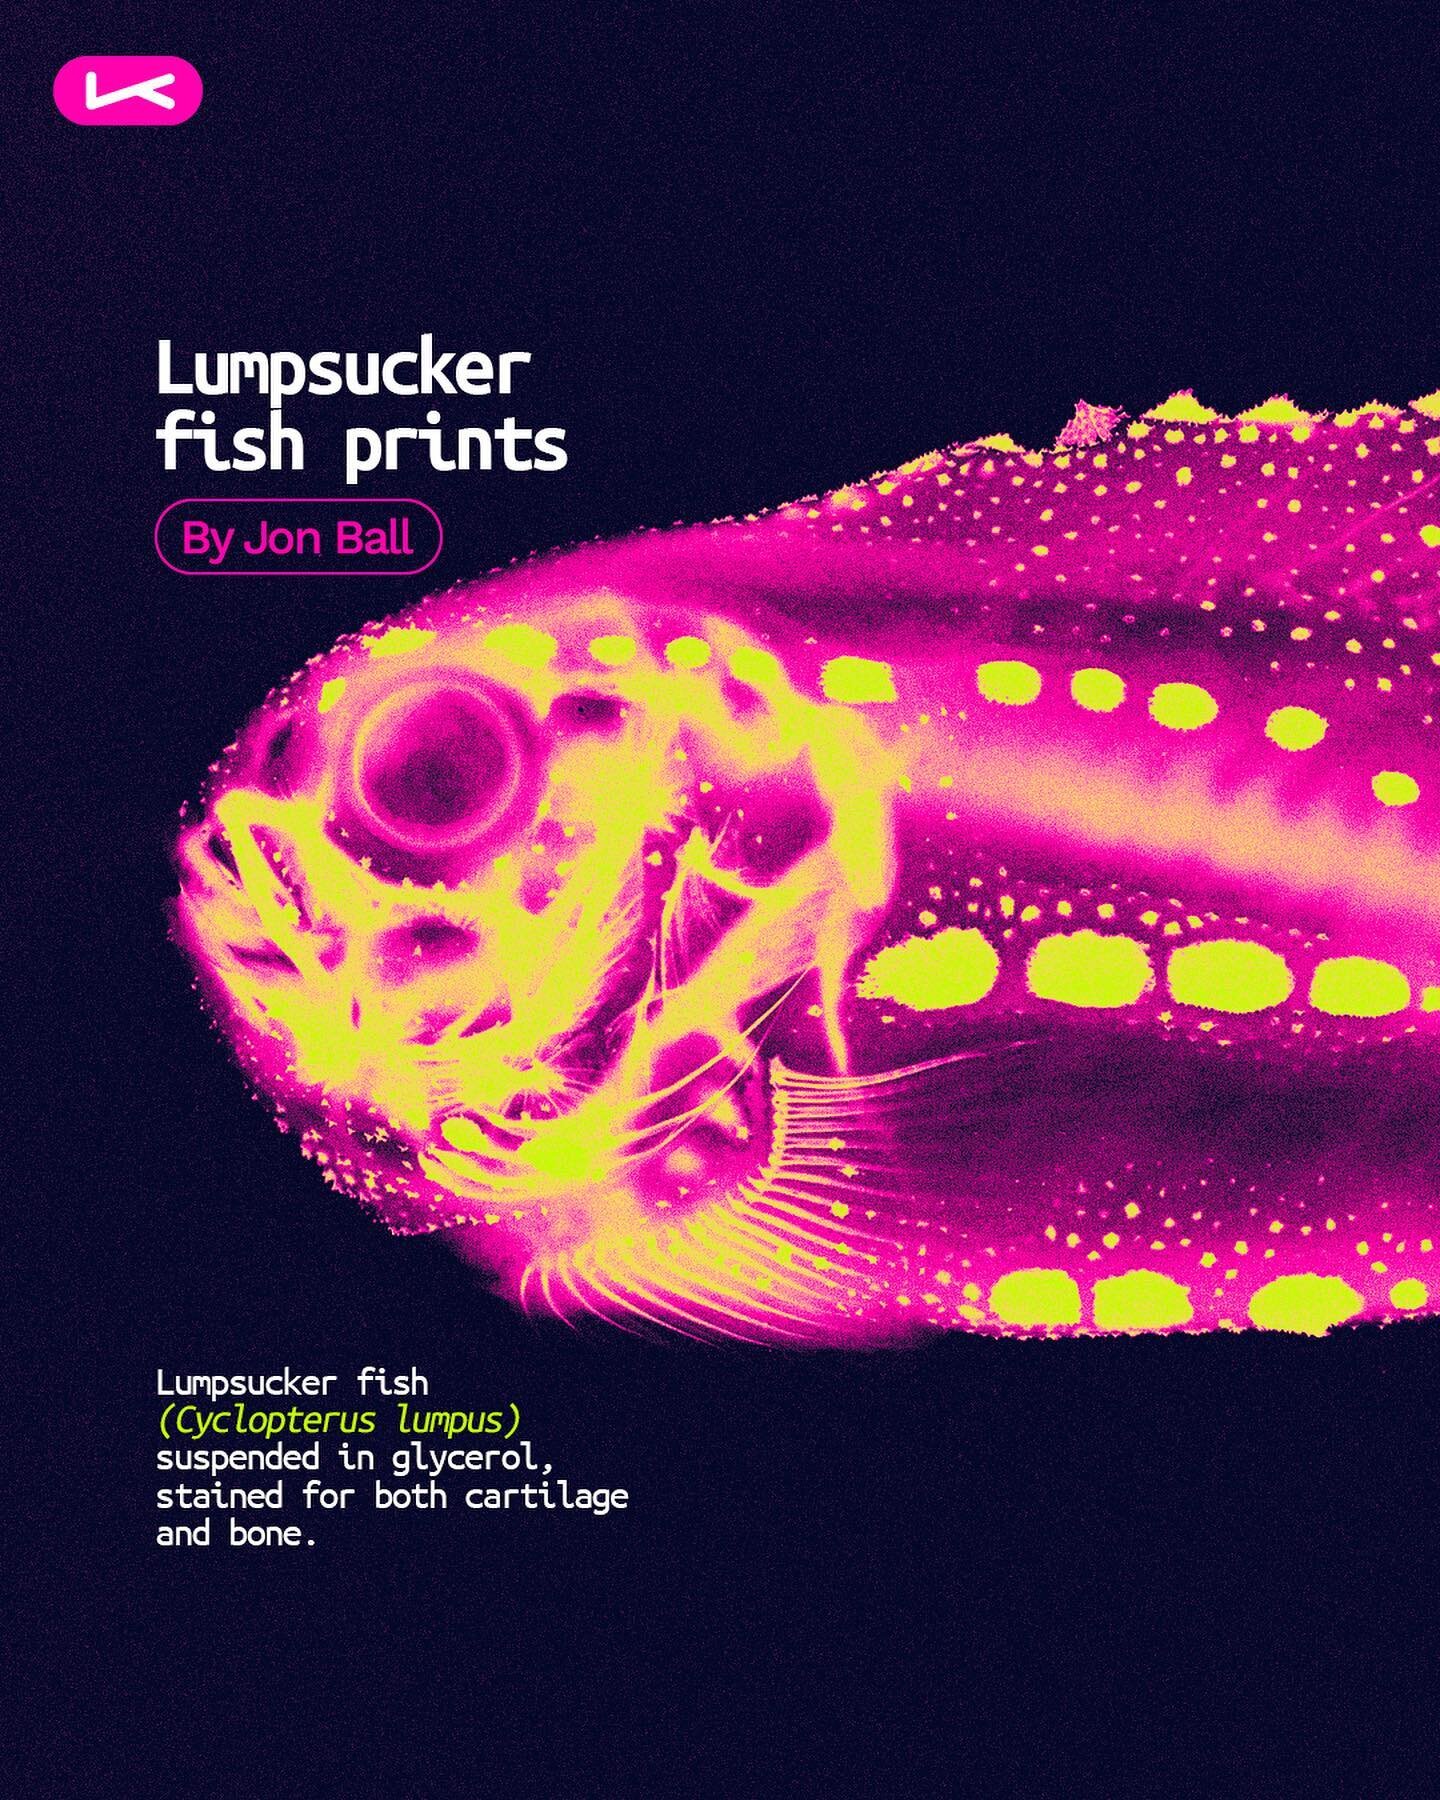 Artivism is here! Discover the work behind &ldquo;Lumpusck fish prints&rdquo; by Jon Bell @uniofexeter 🐟🧪

Tissues fixed with Alicen Blue (cartilage) and Alizarin Red (bone). 

This art was one of the arts in the first series of the Biosecurity Art